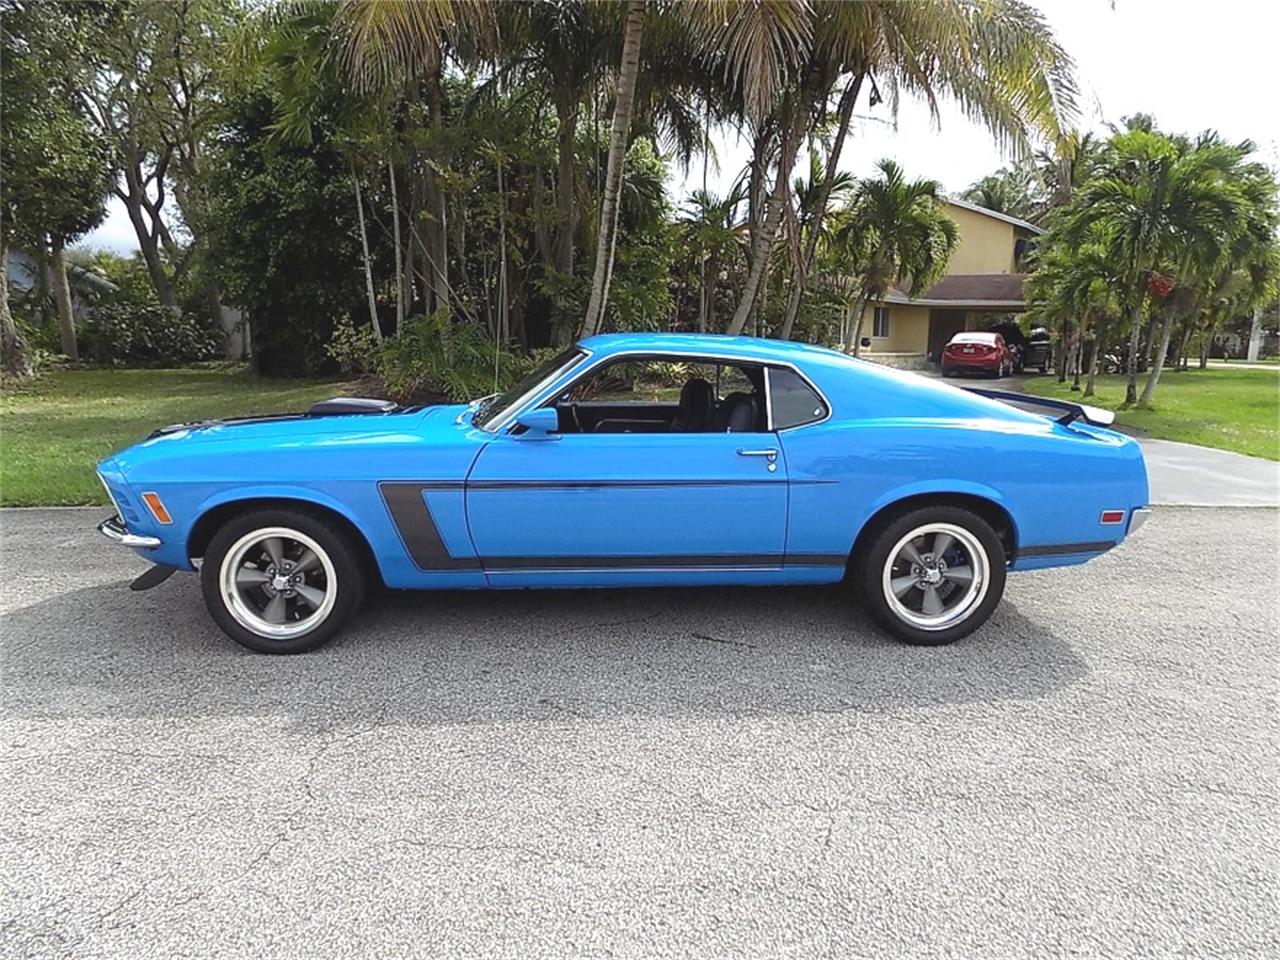 1970 Ford Mustang for Sale | ClassicCars.com | CC-1192172